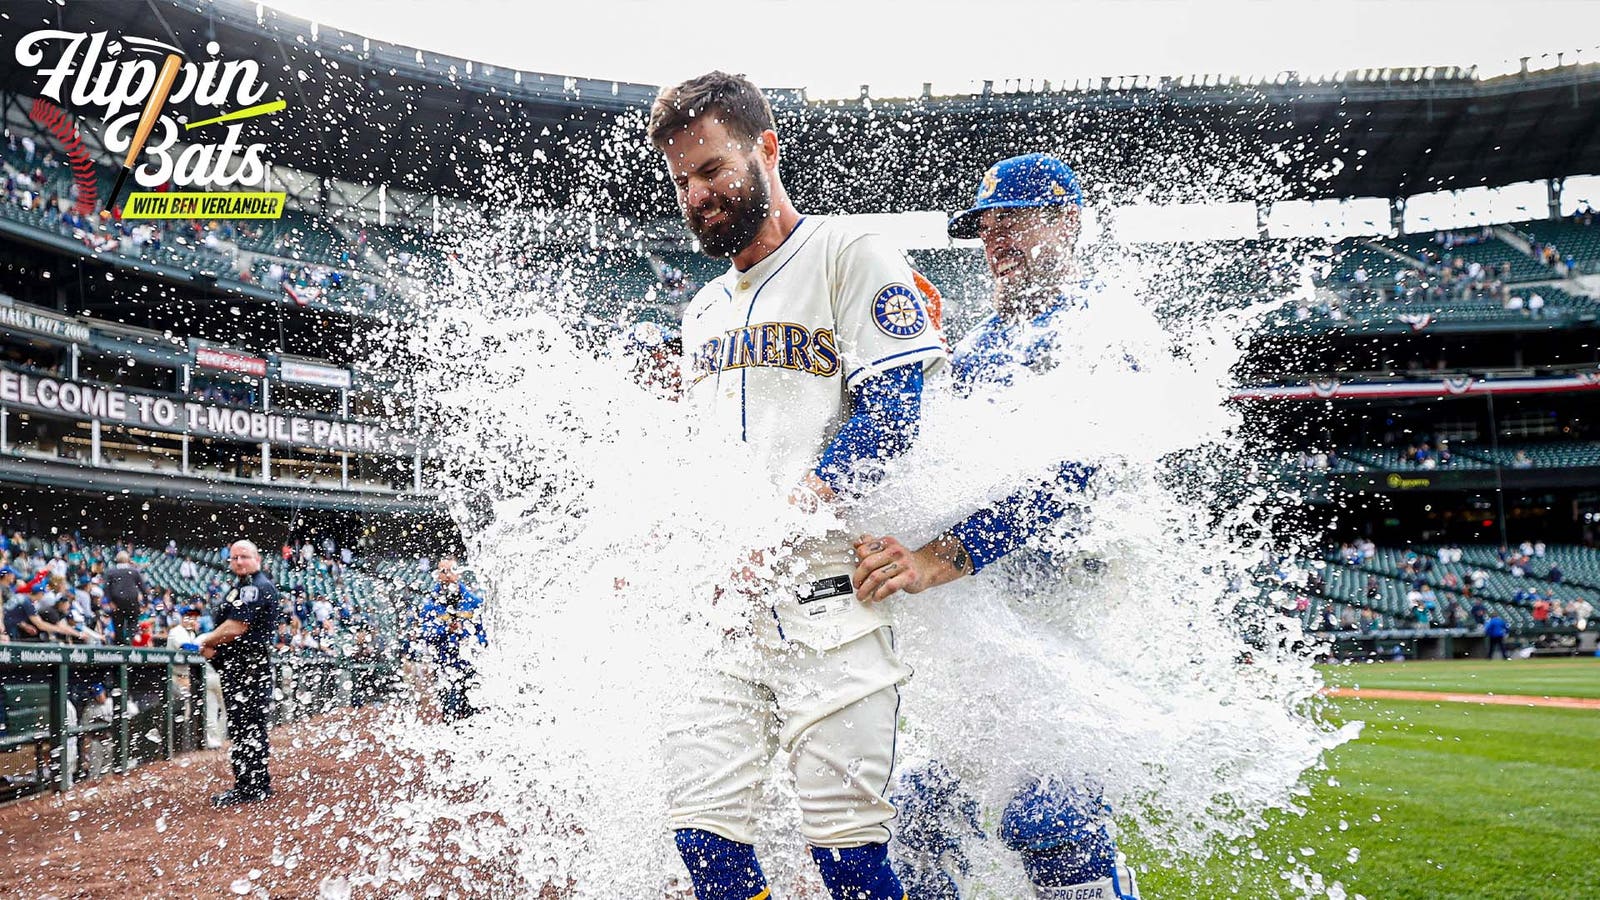 Seattle Mariners have completely revamped and will end playoff drought